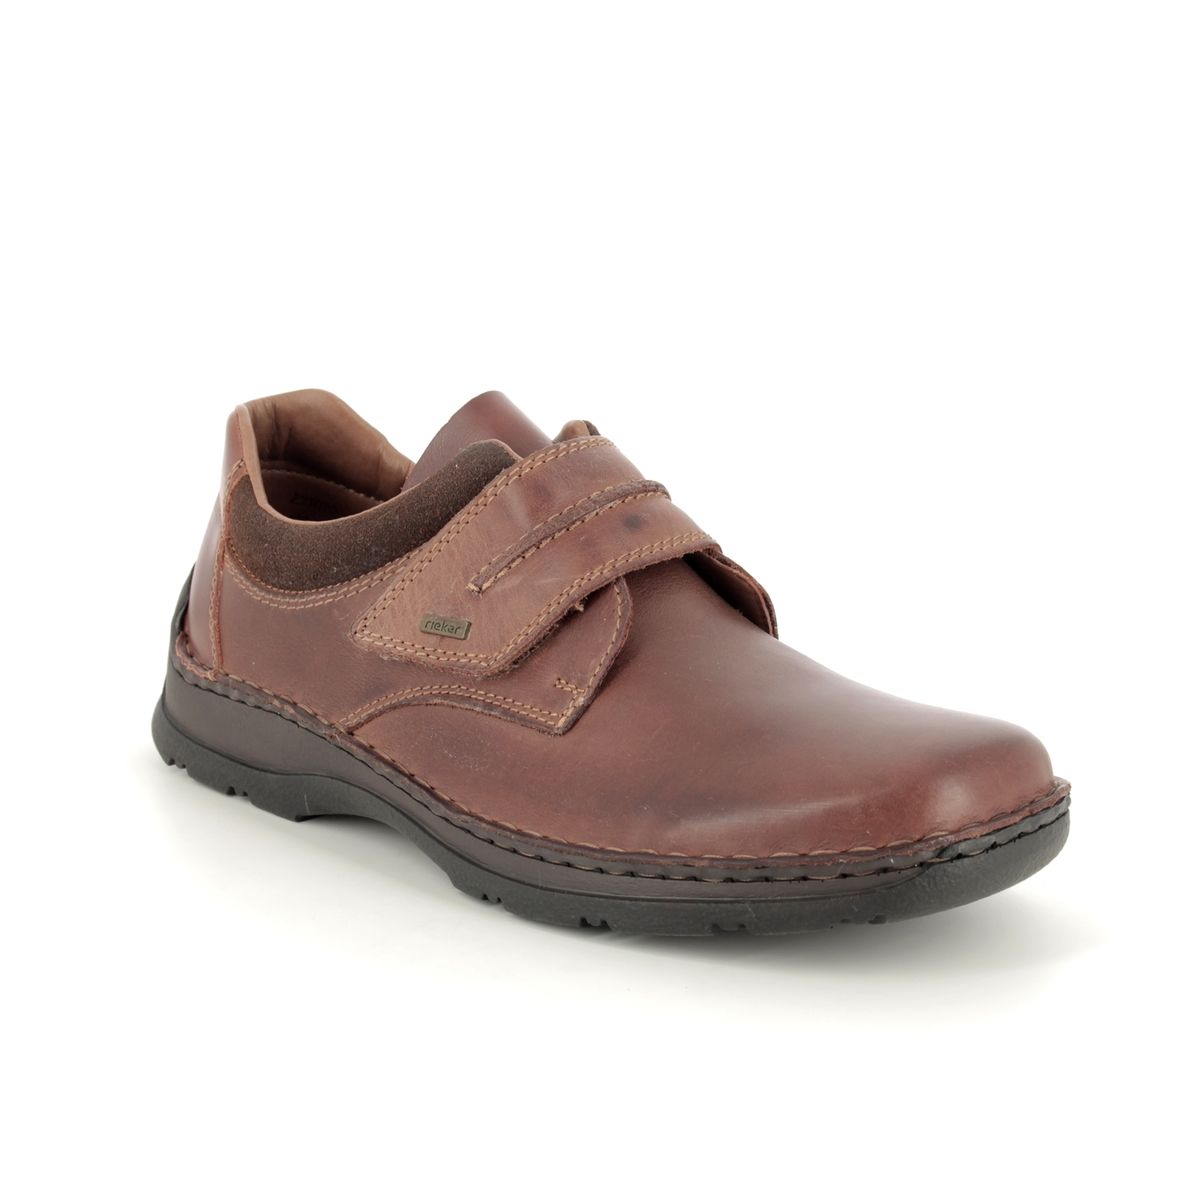 Rieker 05358-25 Brown leather shoes